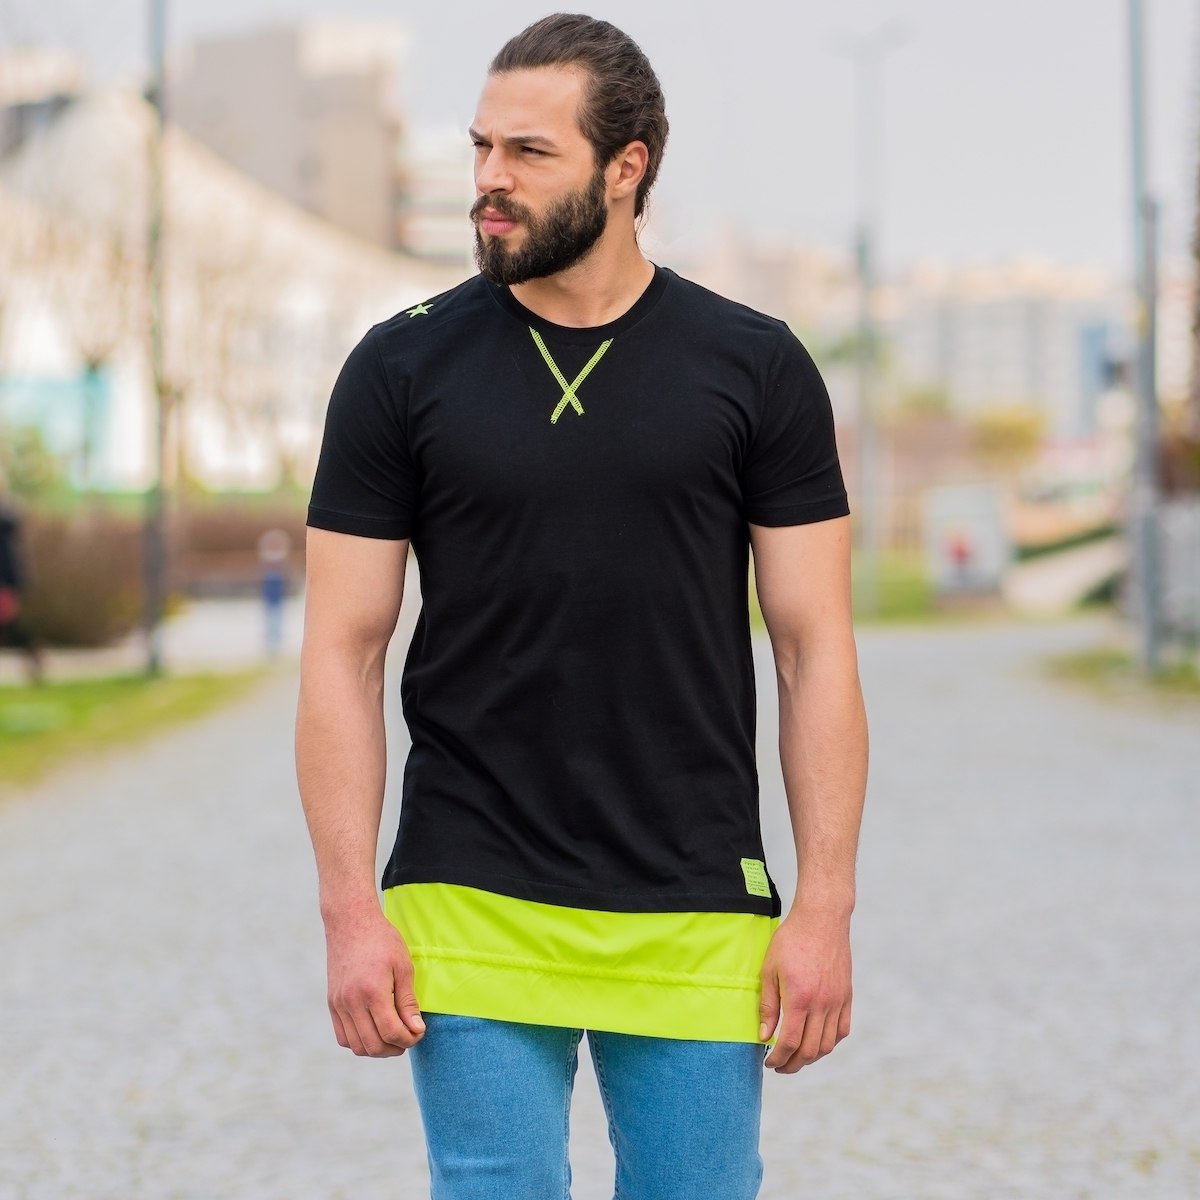 Men's Double-Tailed Neon Oversize T-Shirt In Black